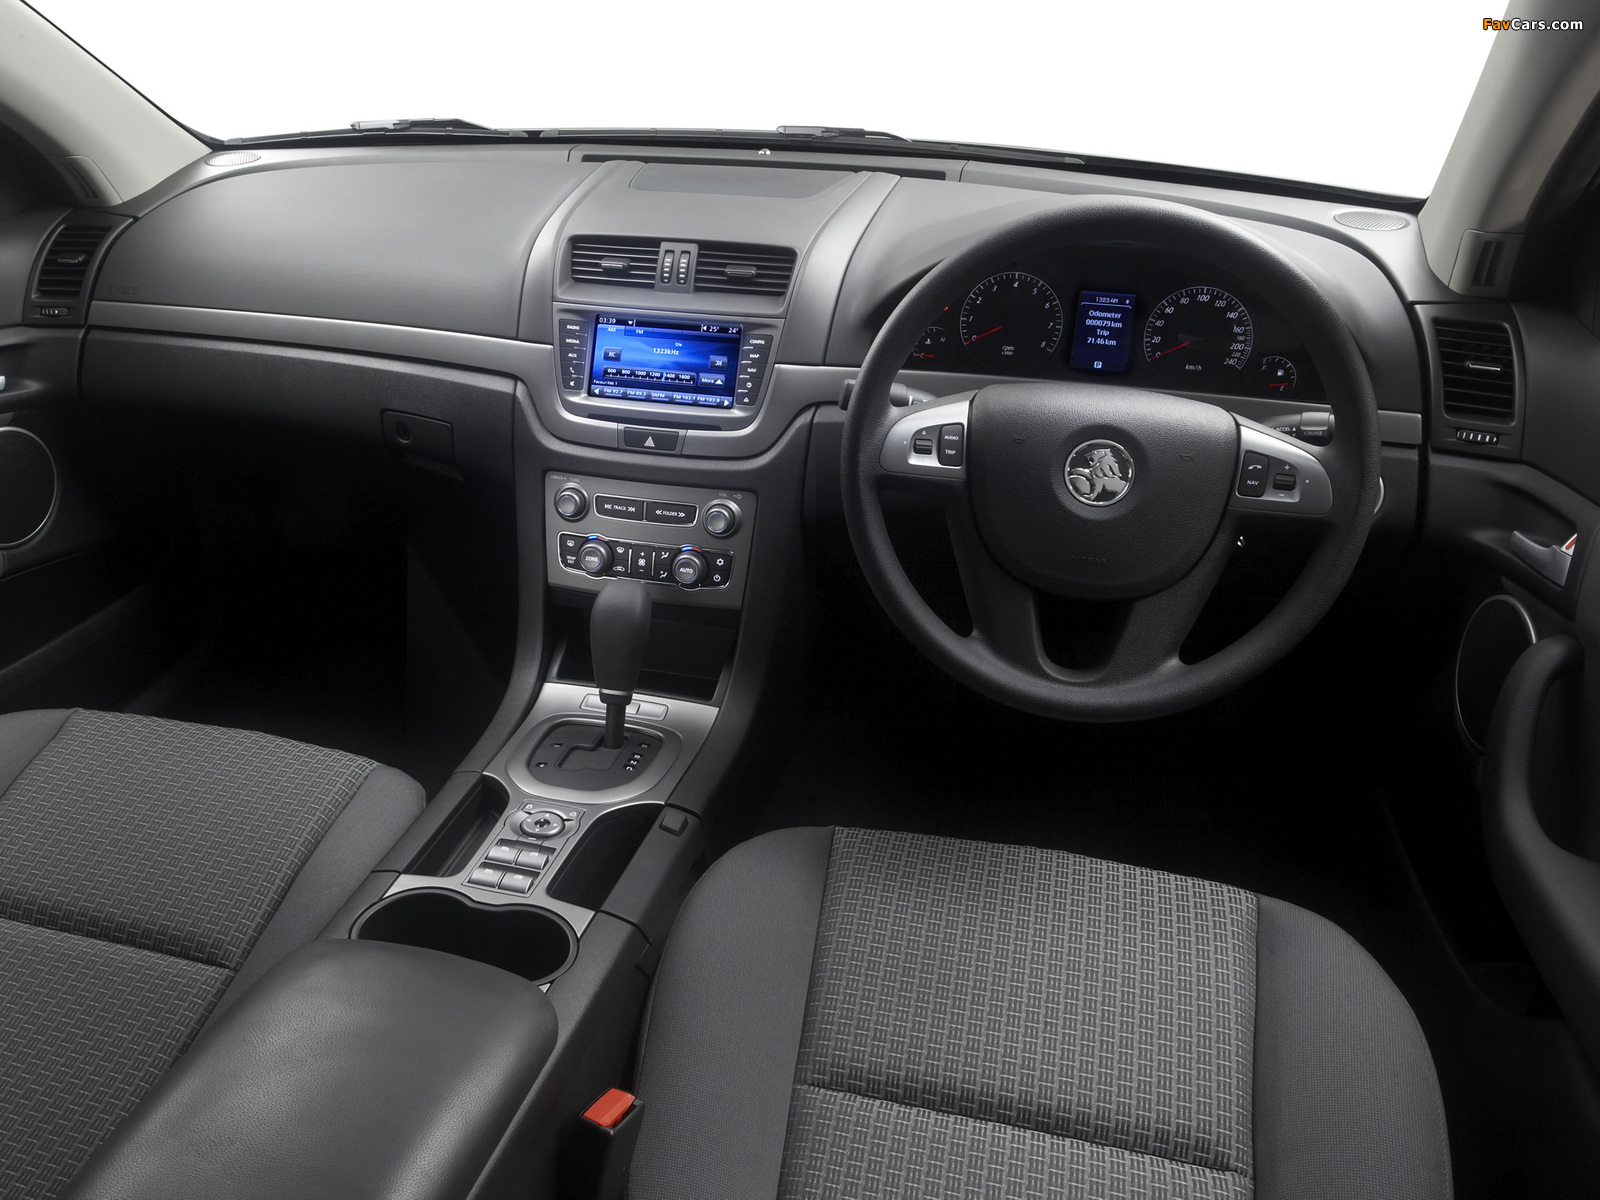 Holden Commodore Omega (VE Series II) 2010–13 pictures (1600 x 1200)